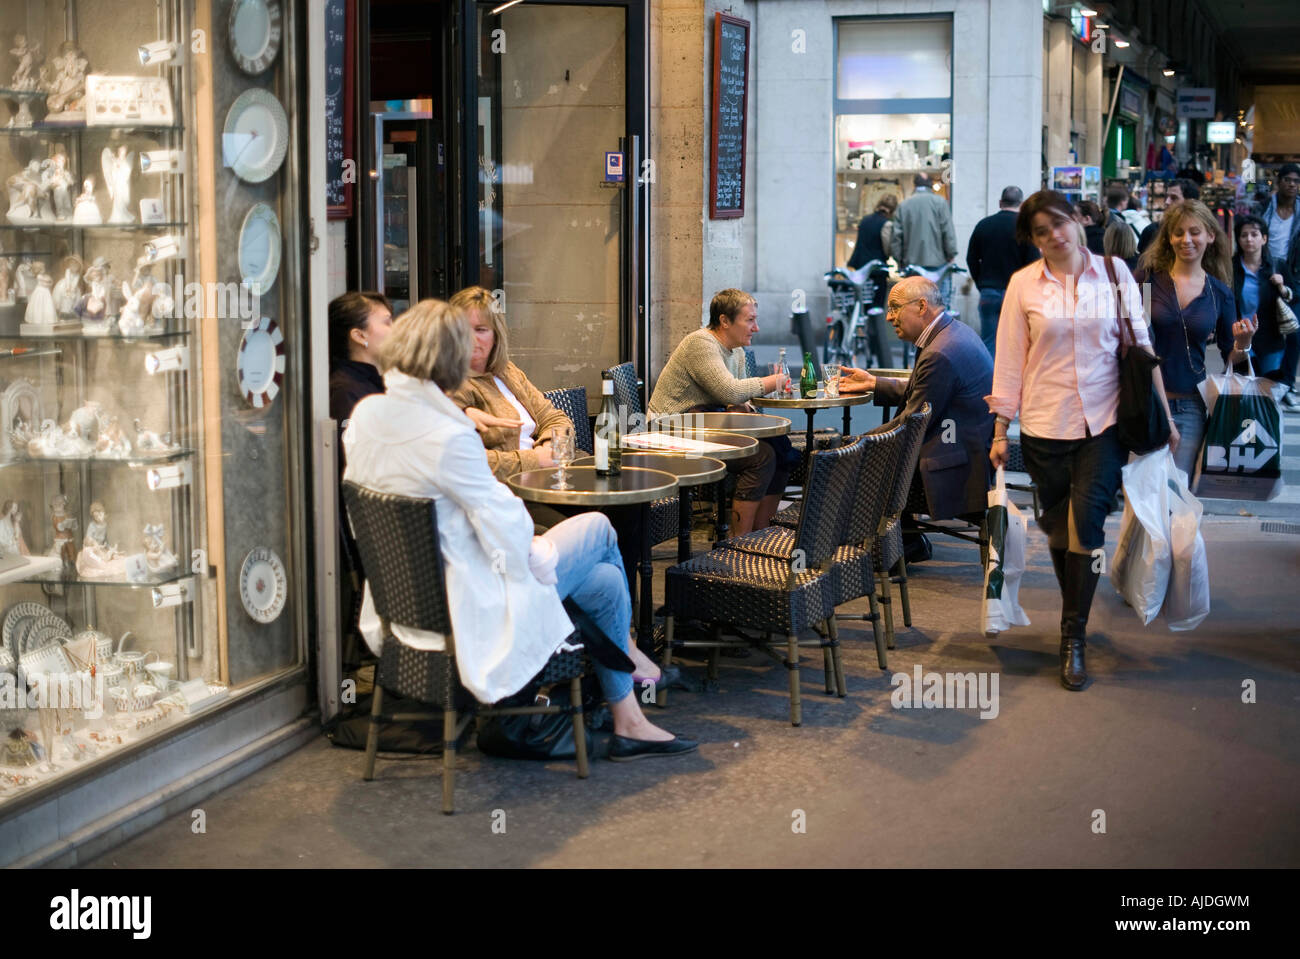 Shoppers and bistro customers in the Rue de Rivoli arcades, next to the Louvre Museum. Stock Photo